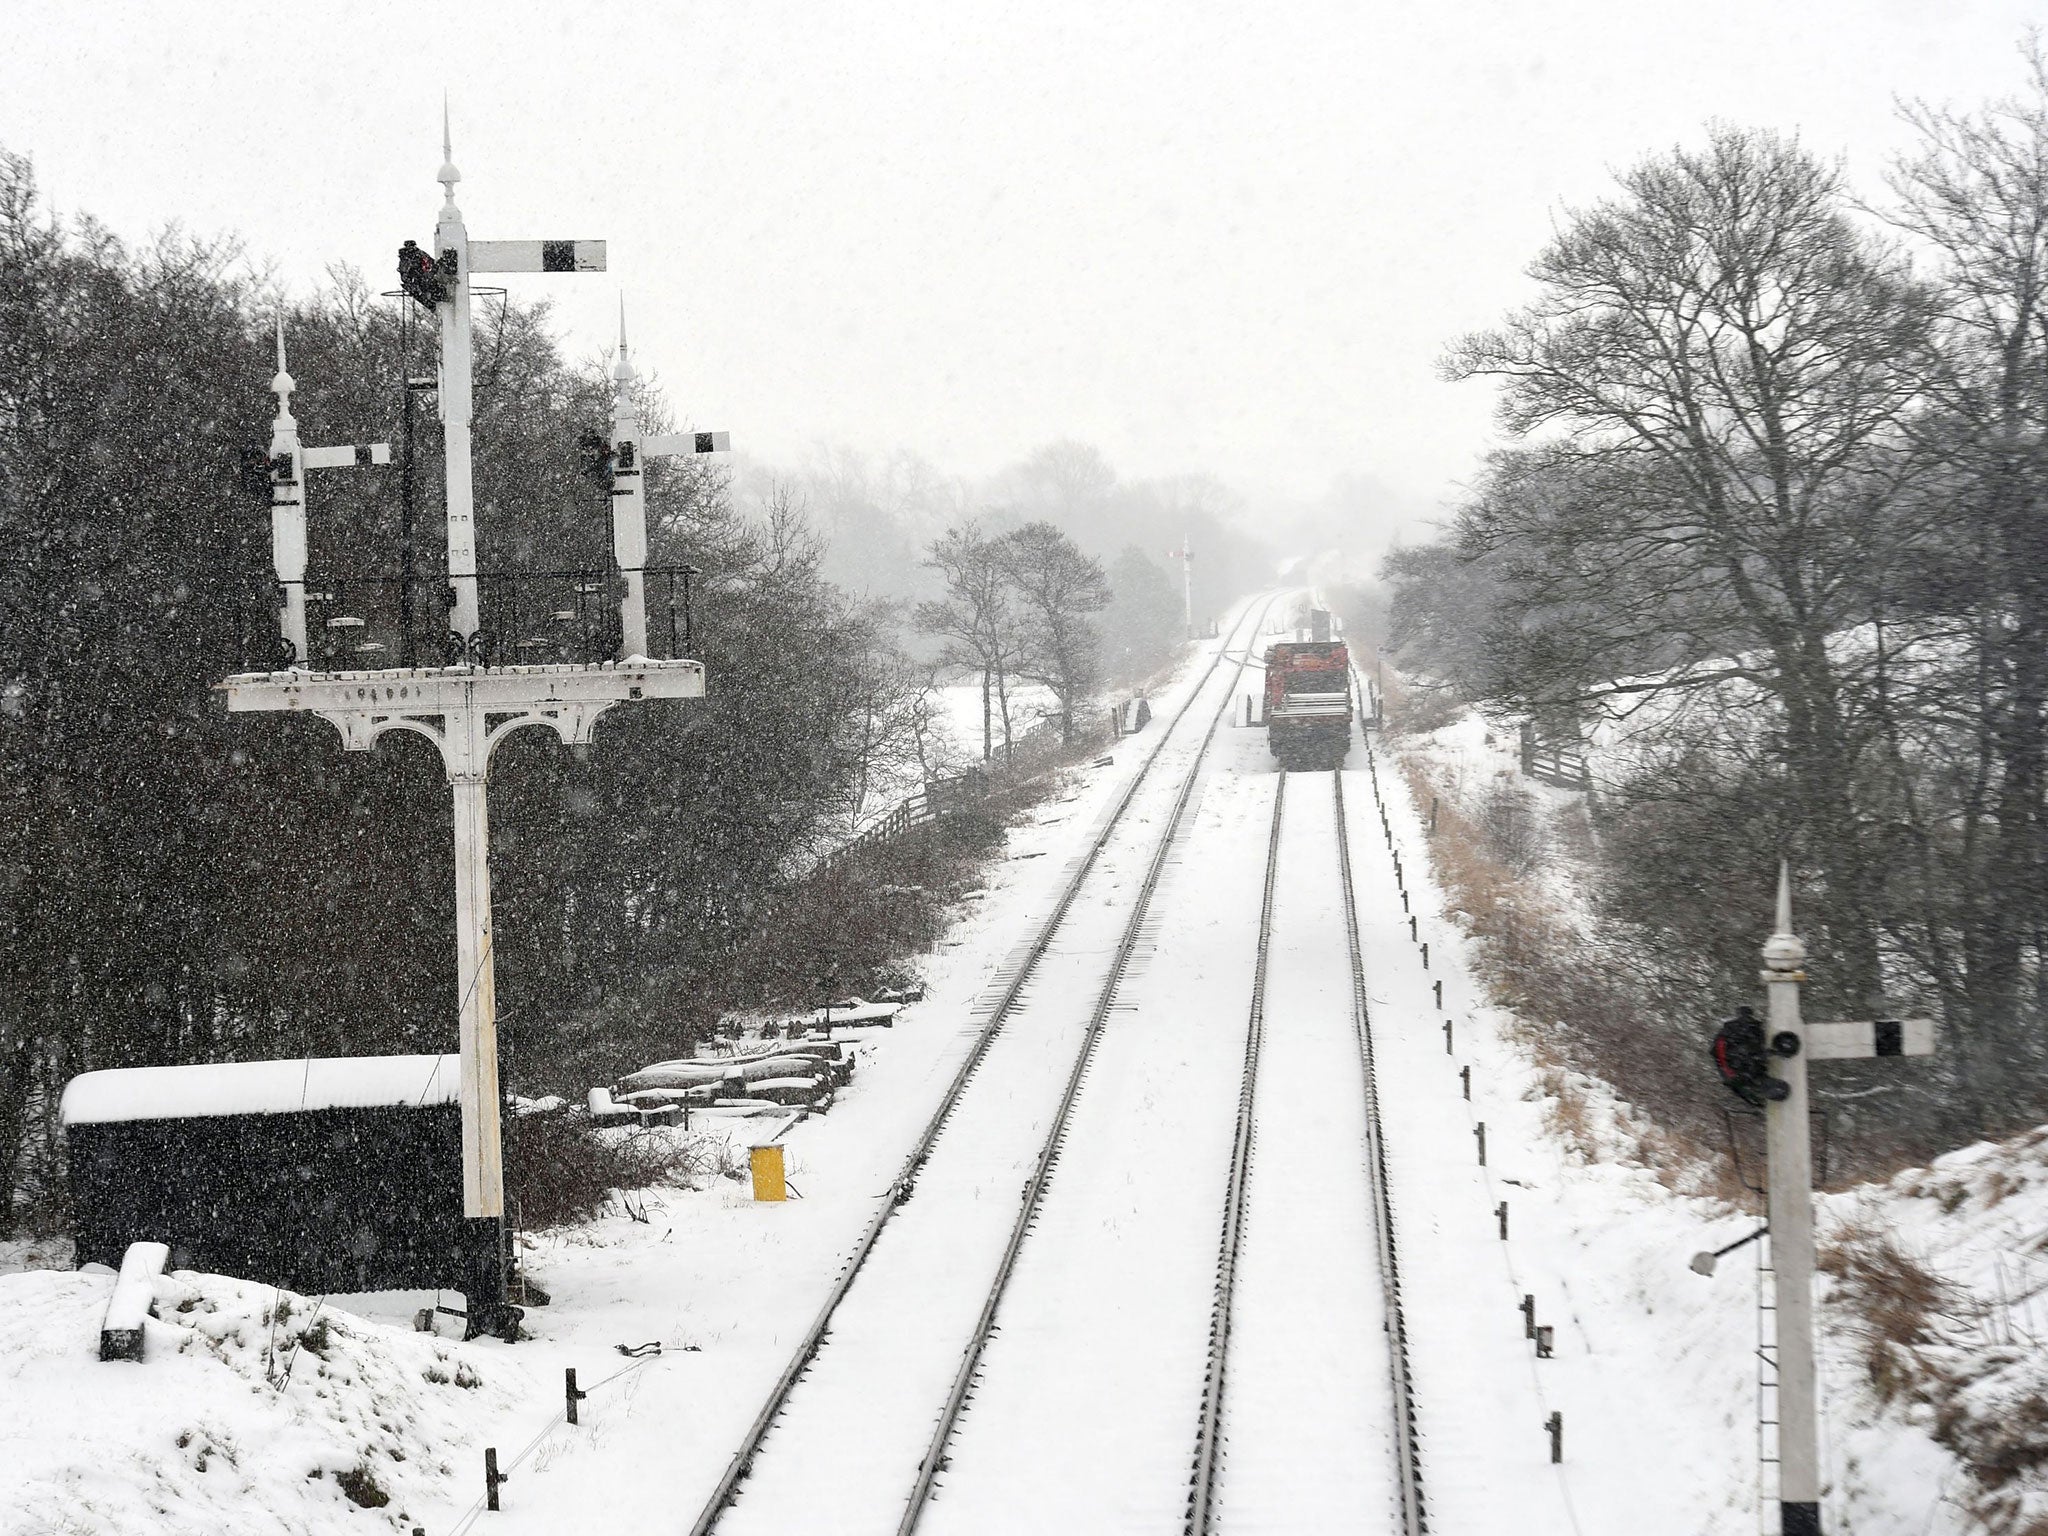 A deserted Goathland Station as blizzard sweeps through North Yorkshire